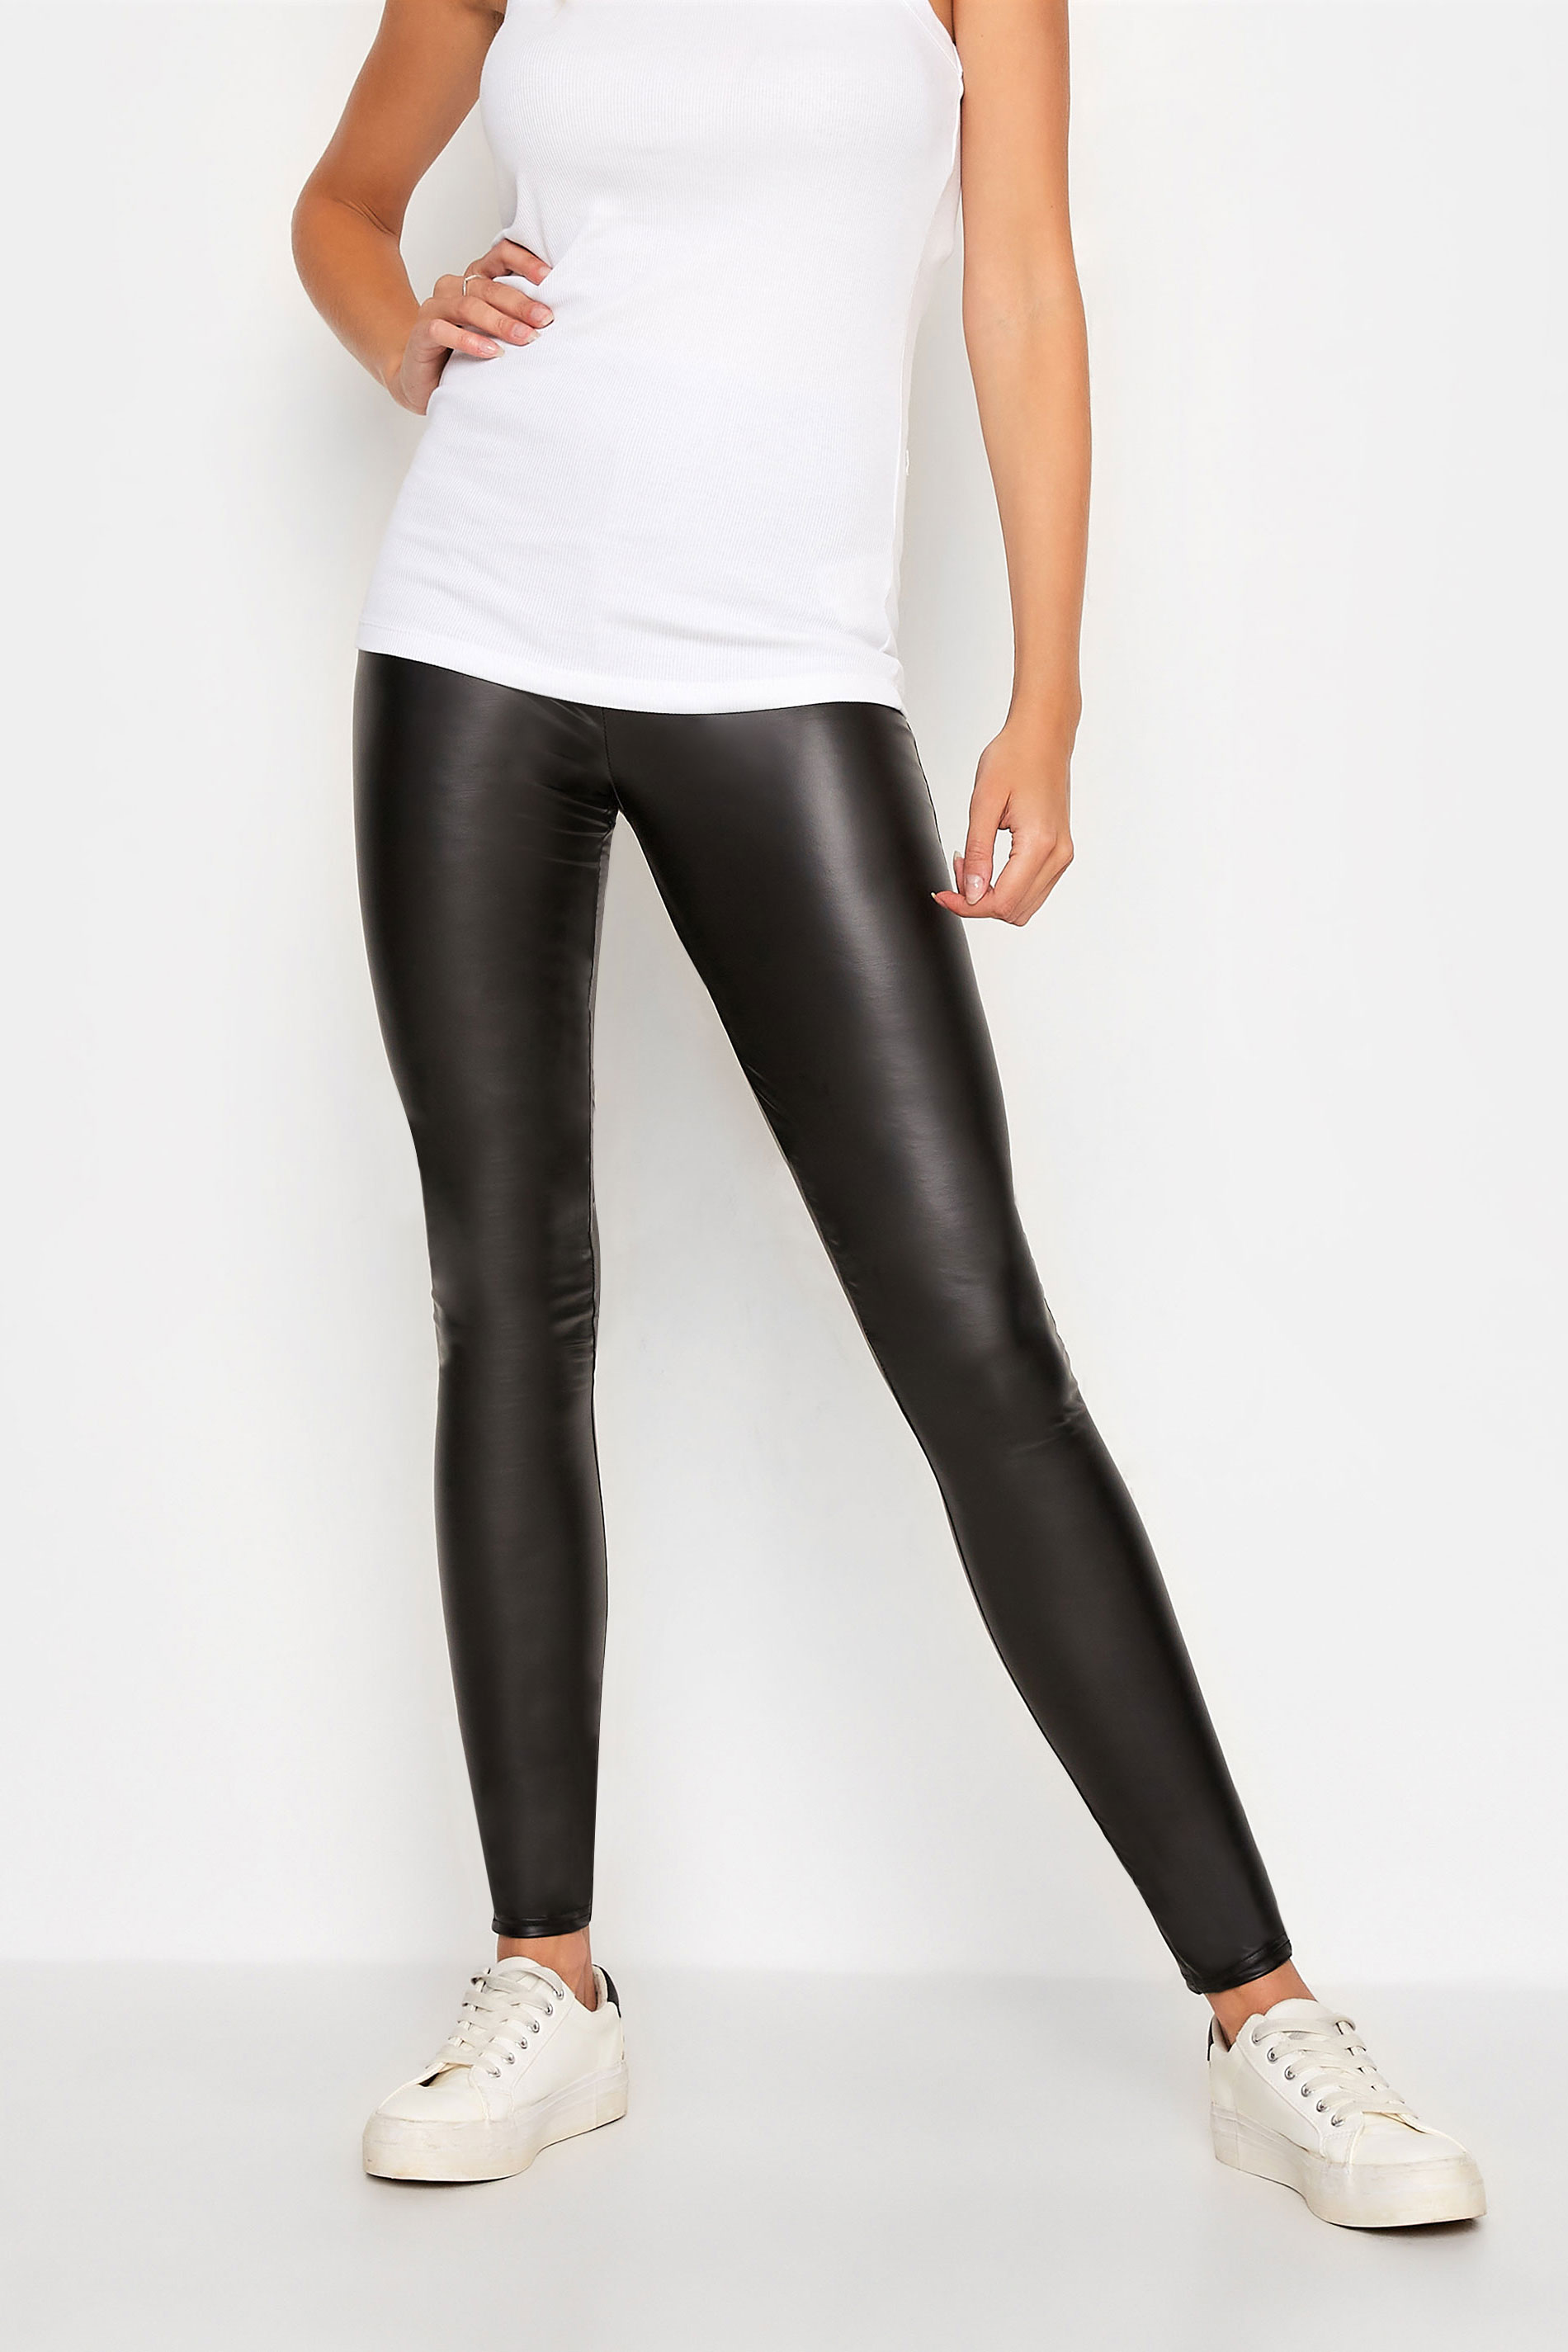 Tall Black Stretch Leather Look Leggings